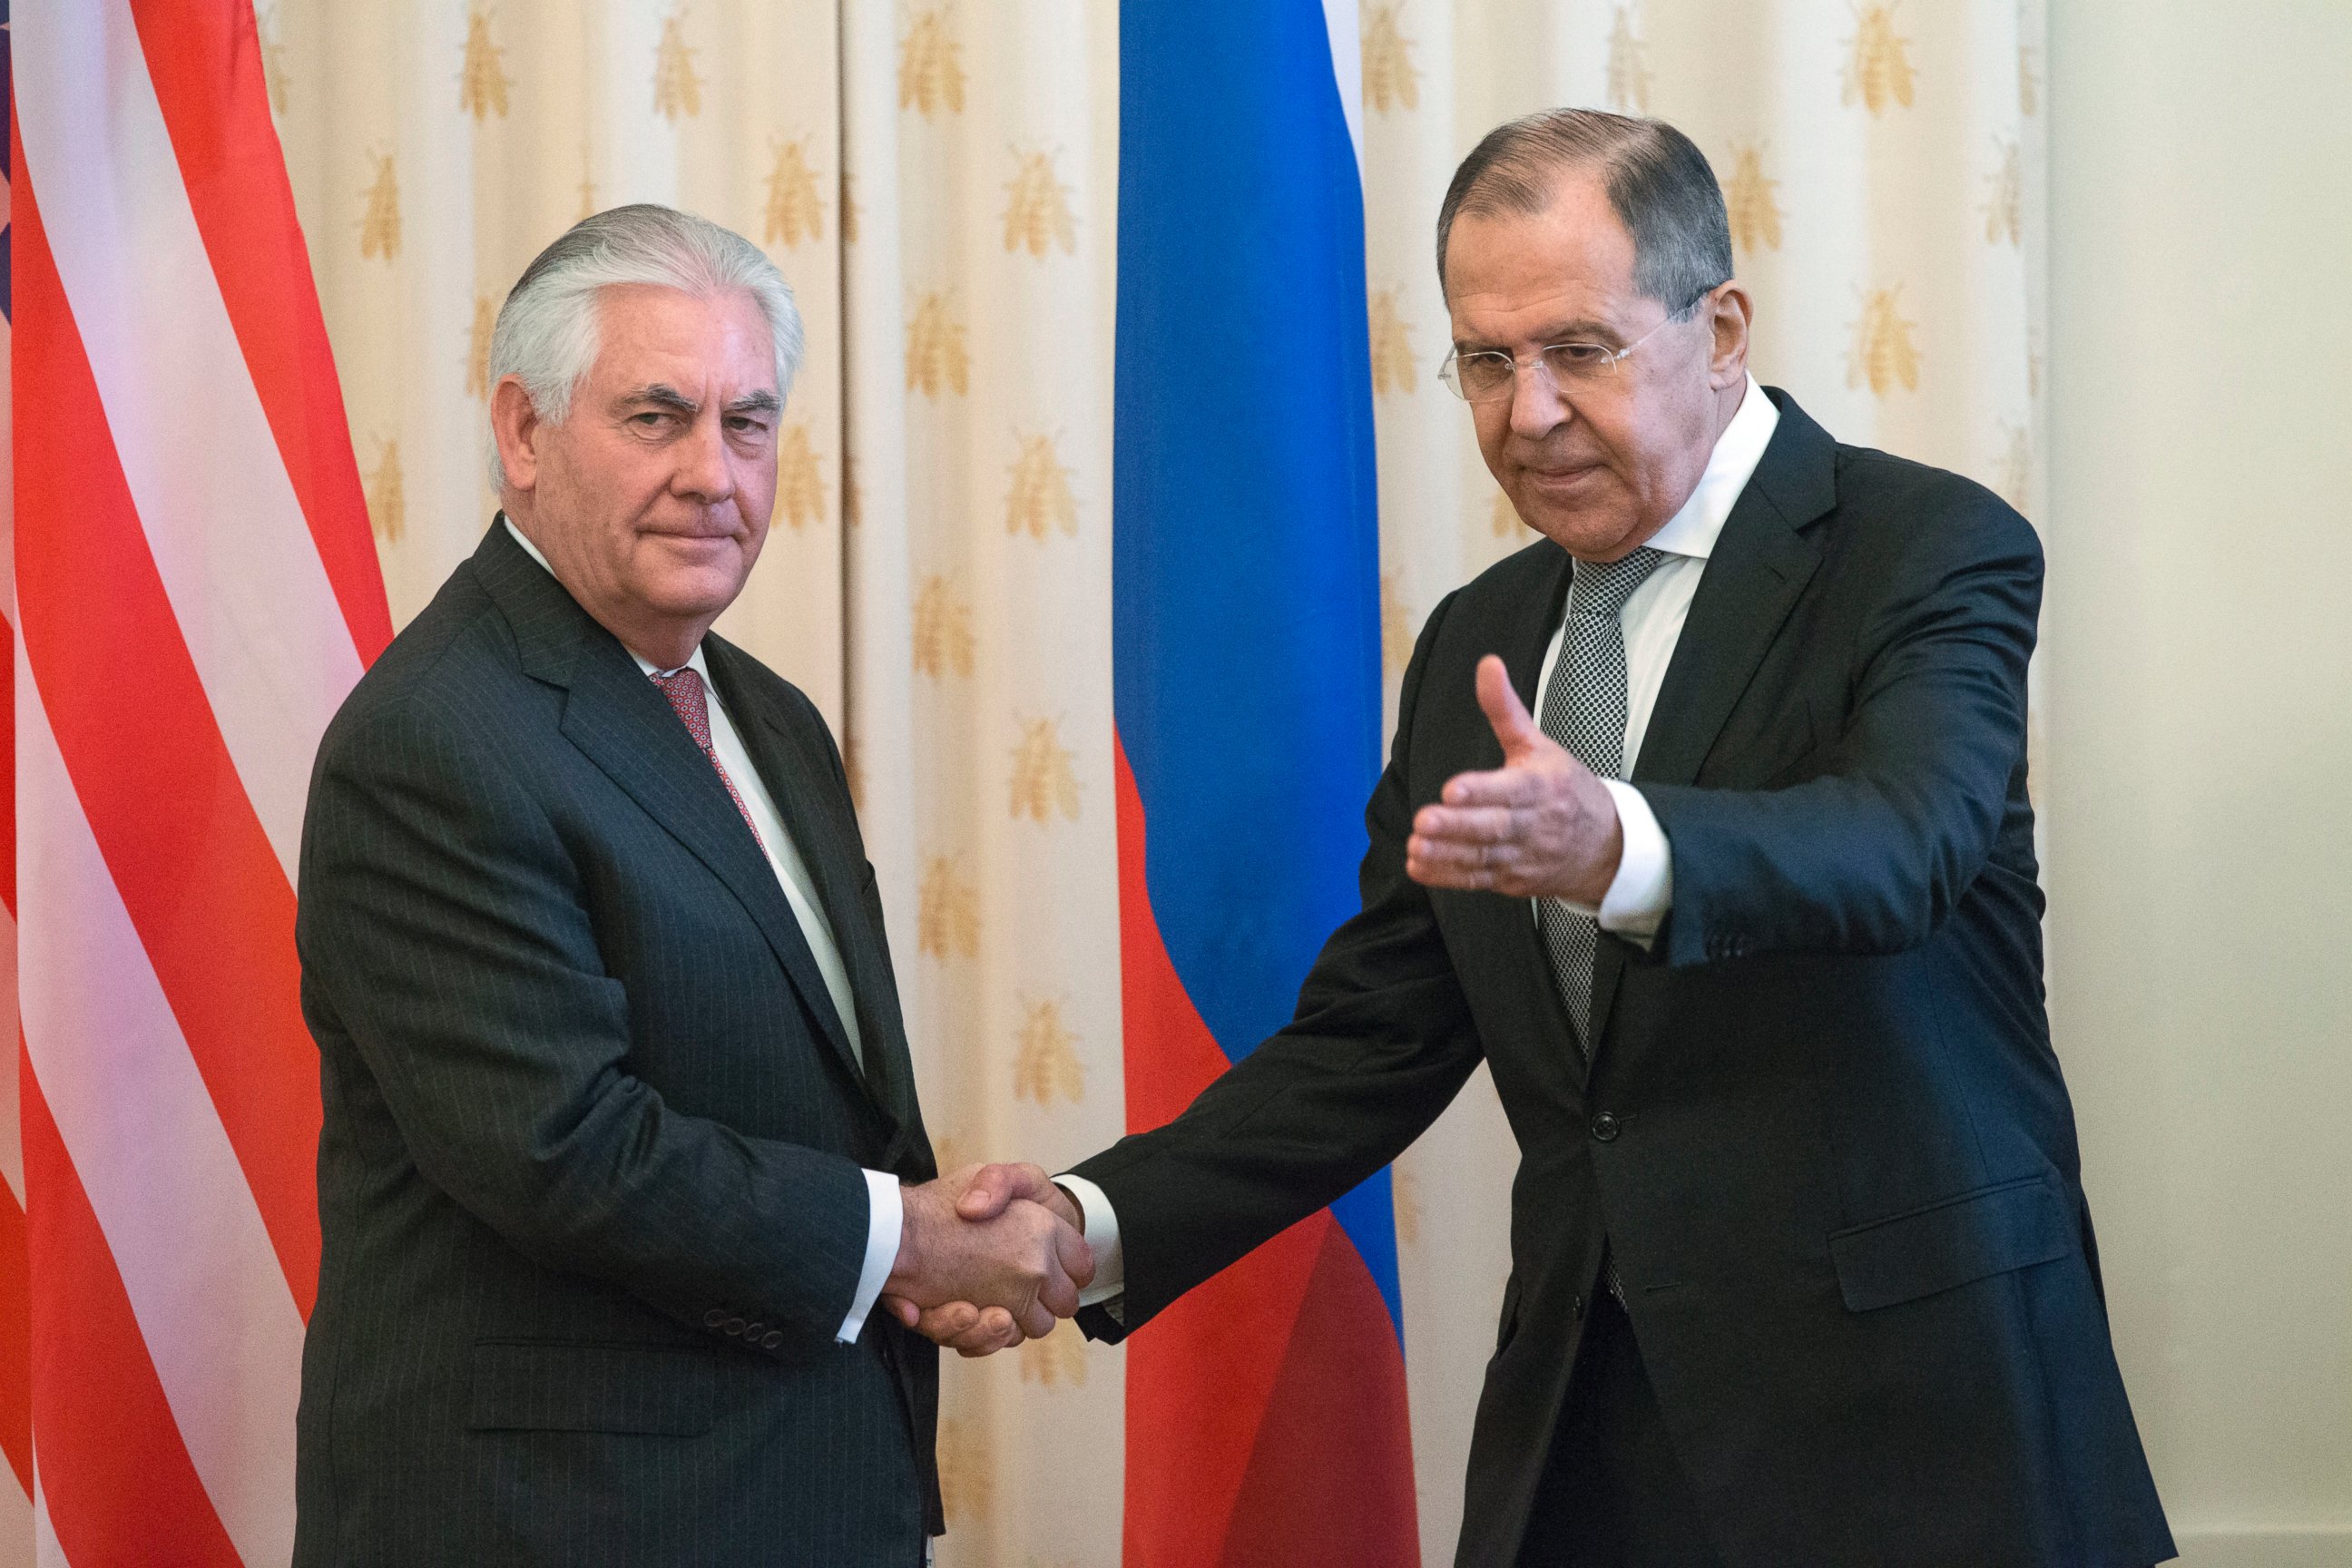 PHOTO: US Secretary of State Rex Tillerson and Russian Foreign Minister Sergey Lavrov, shakes hands prior to their talks in Moscow, April 12, 2017.